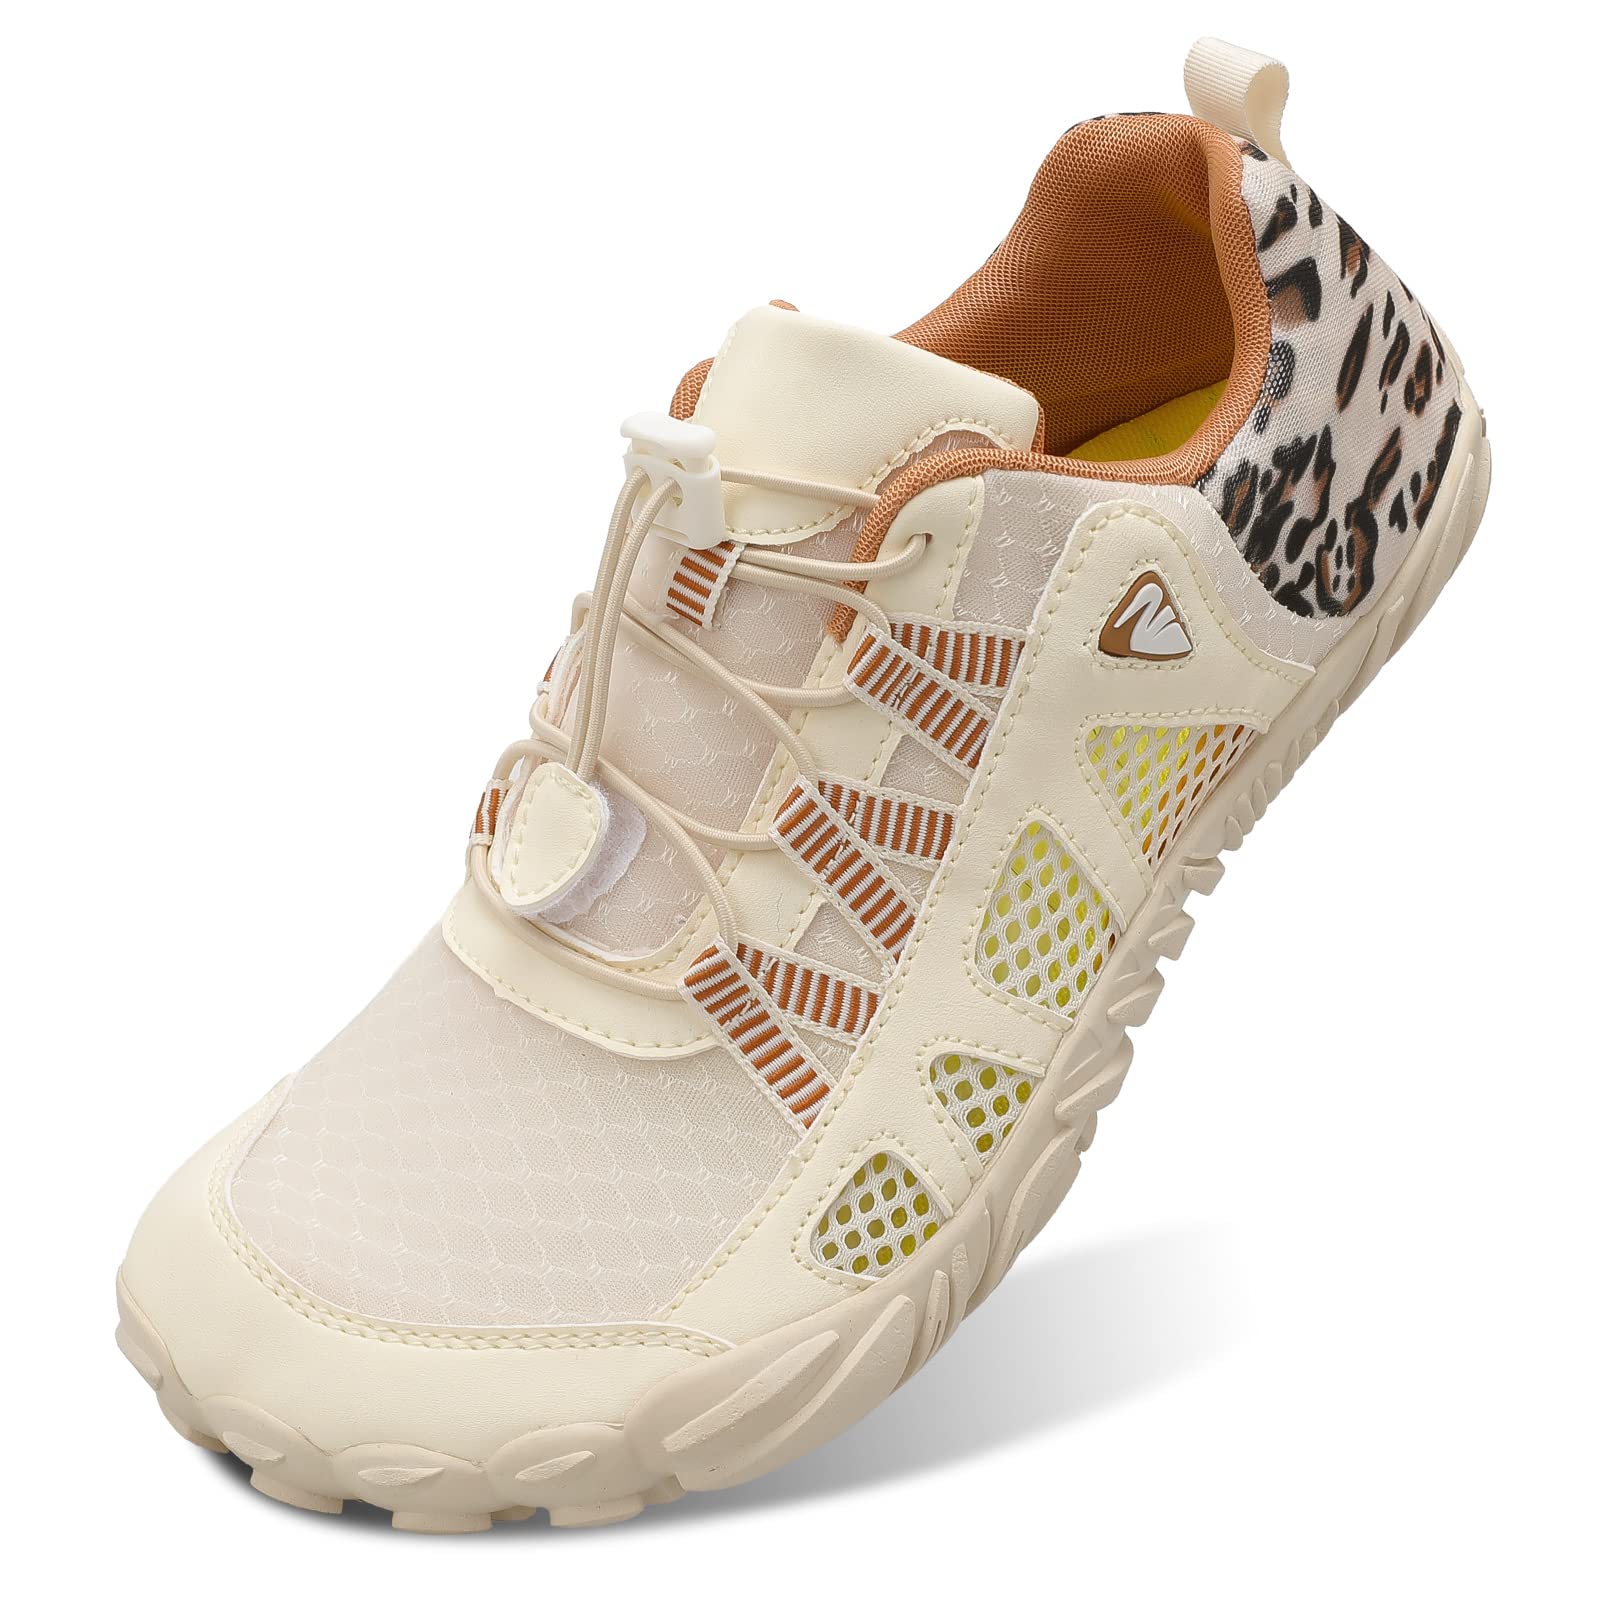 L-run Men's Barefoot Athletic Hiking Water Shoes